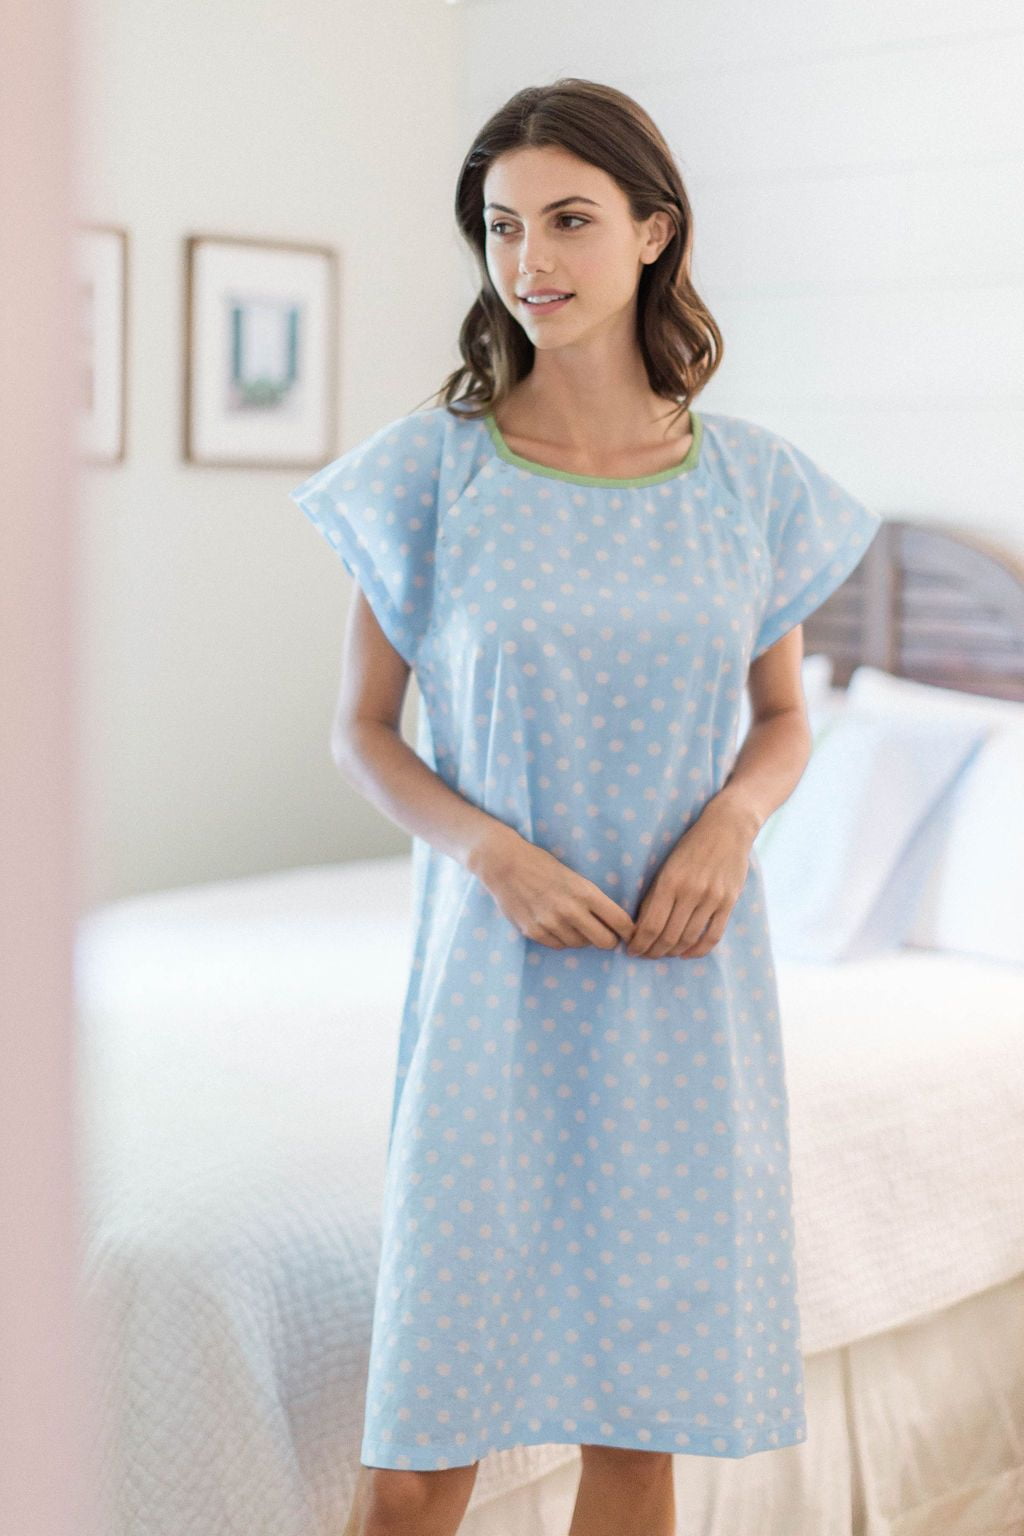 Hospital Gowns - Wholesale Medical Gowns(3 Pack) - Walmart.com